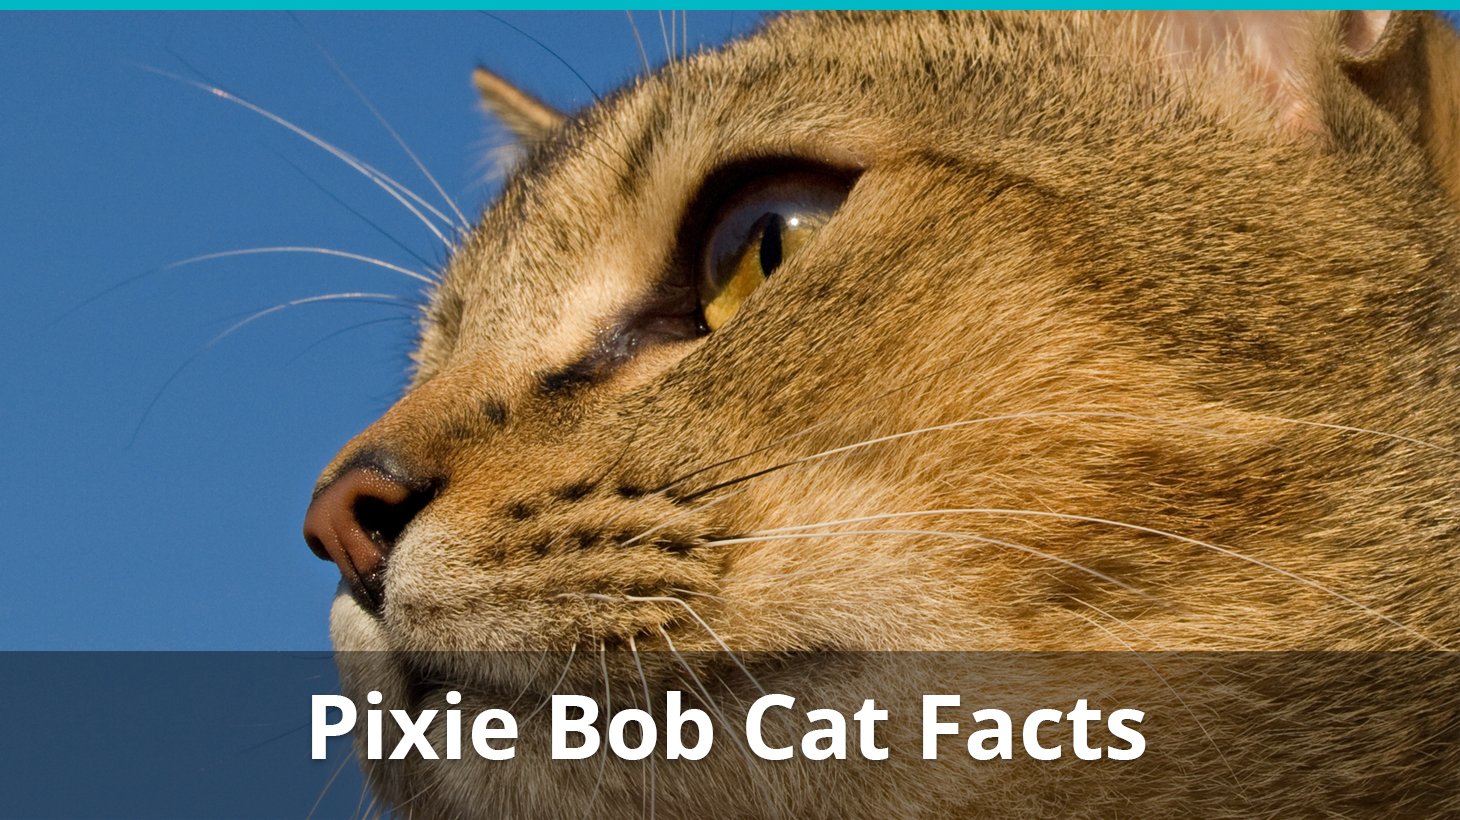 Pixie Bob Cat Facts Colors Health Issues Nutrition And More Vital Info